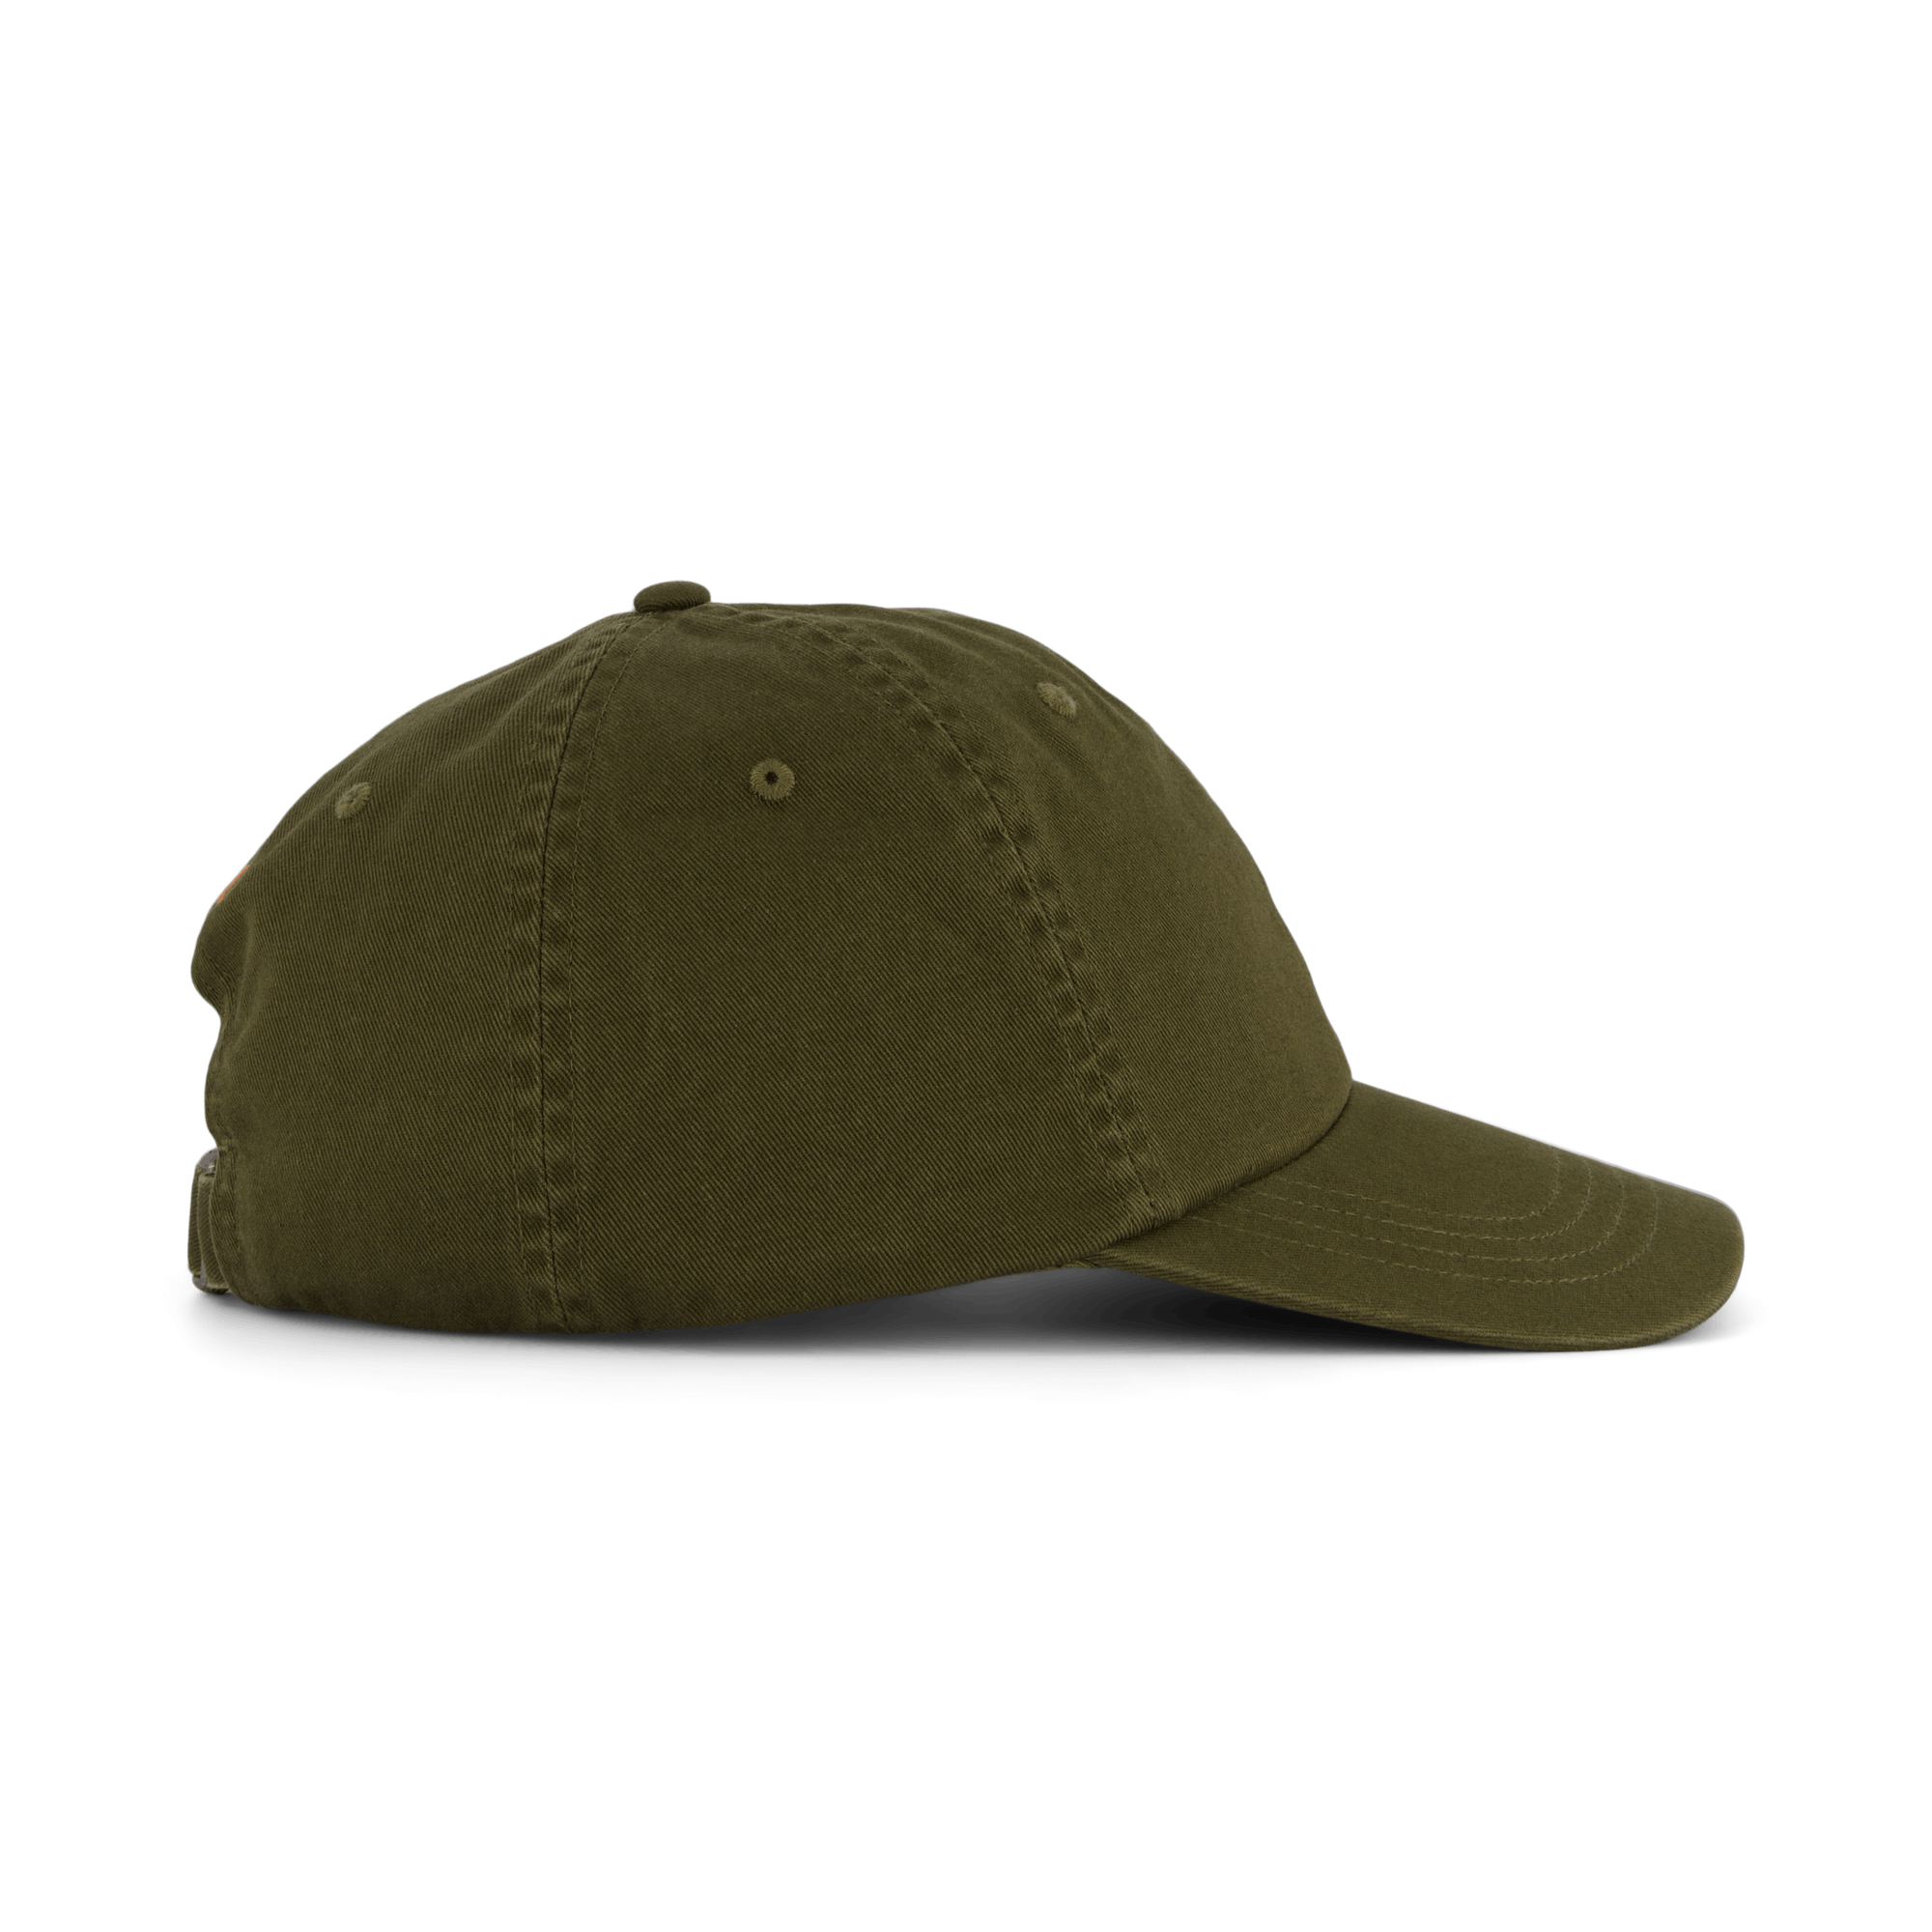 Cotton Chino Ball Cap Canopy Olive